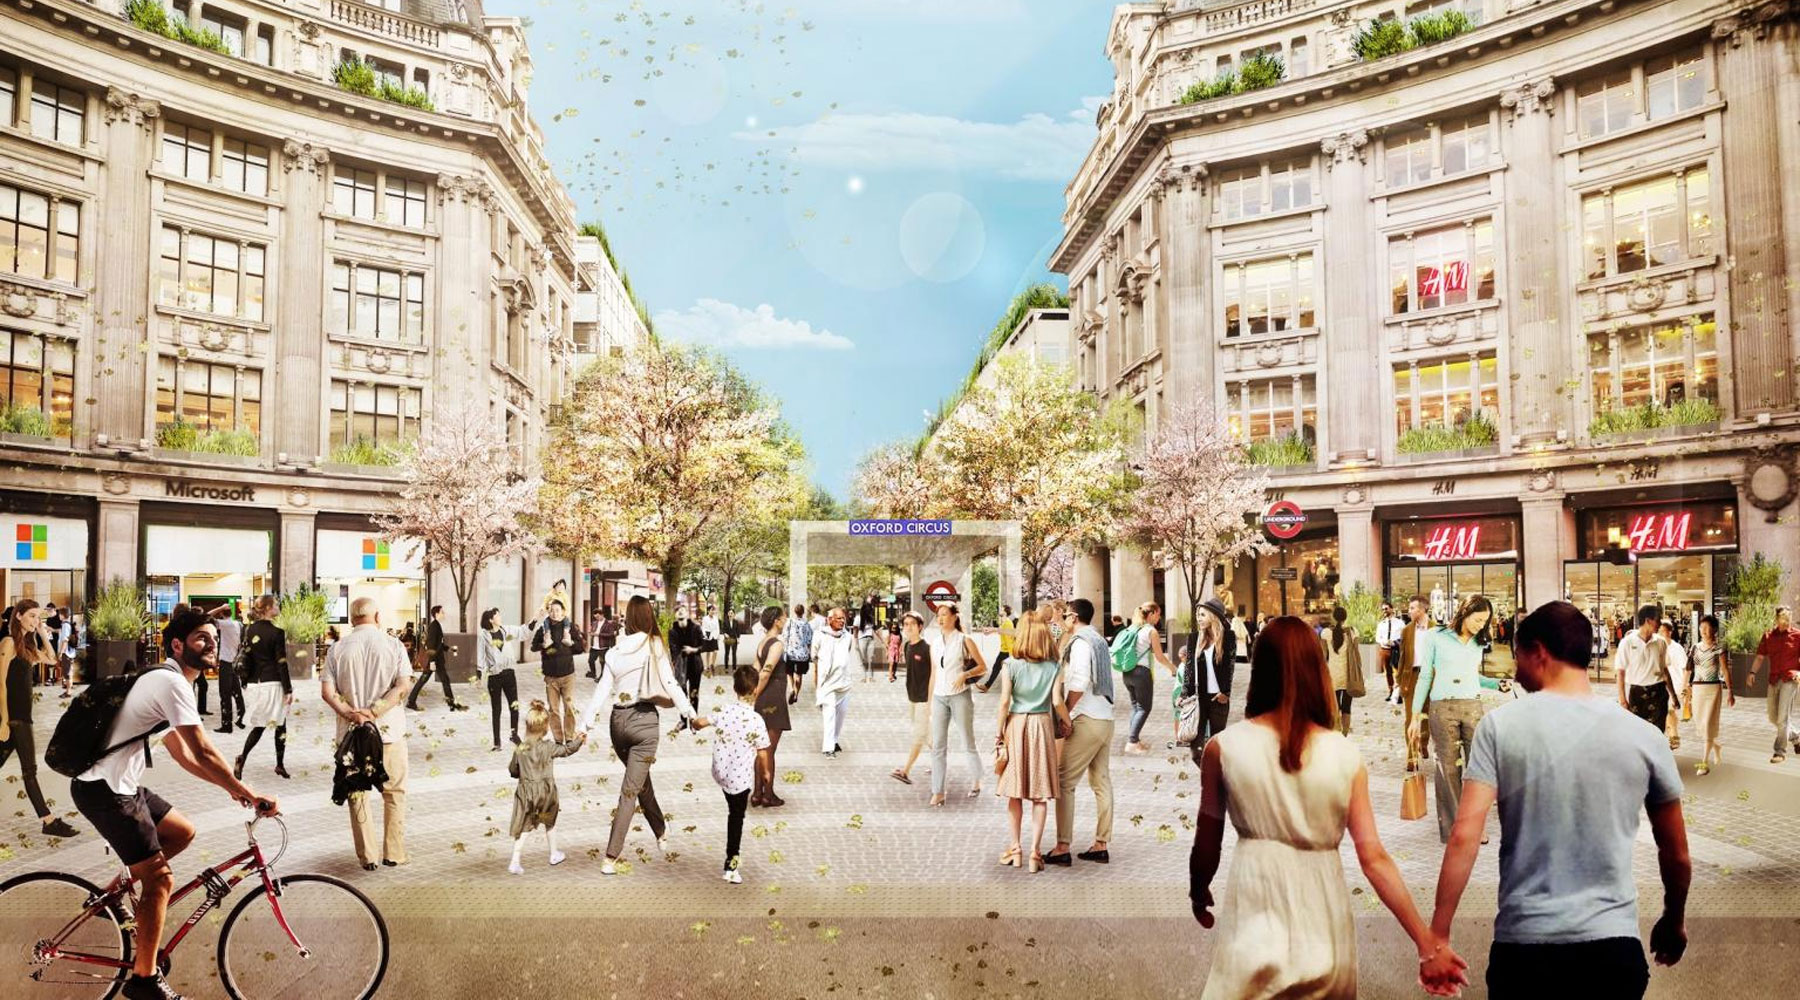 Oxford Circus is to be part-pedestrianised